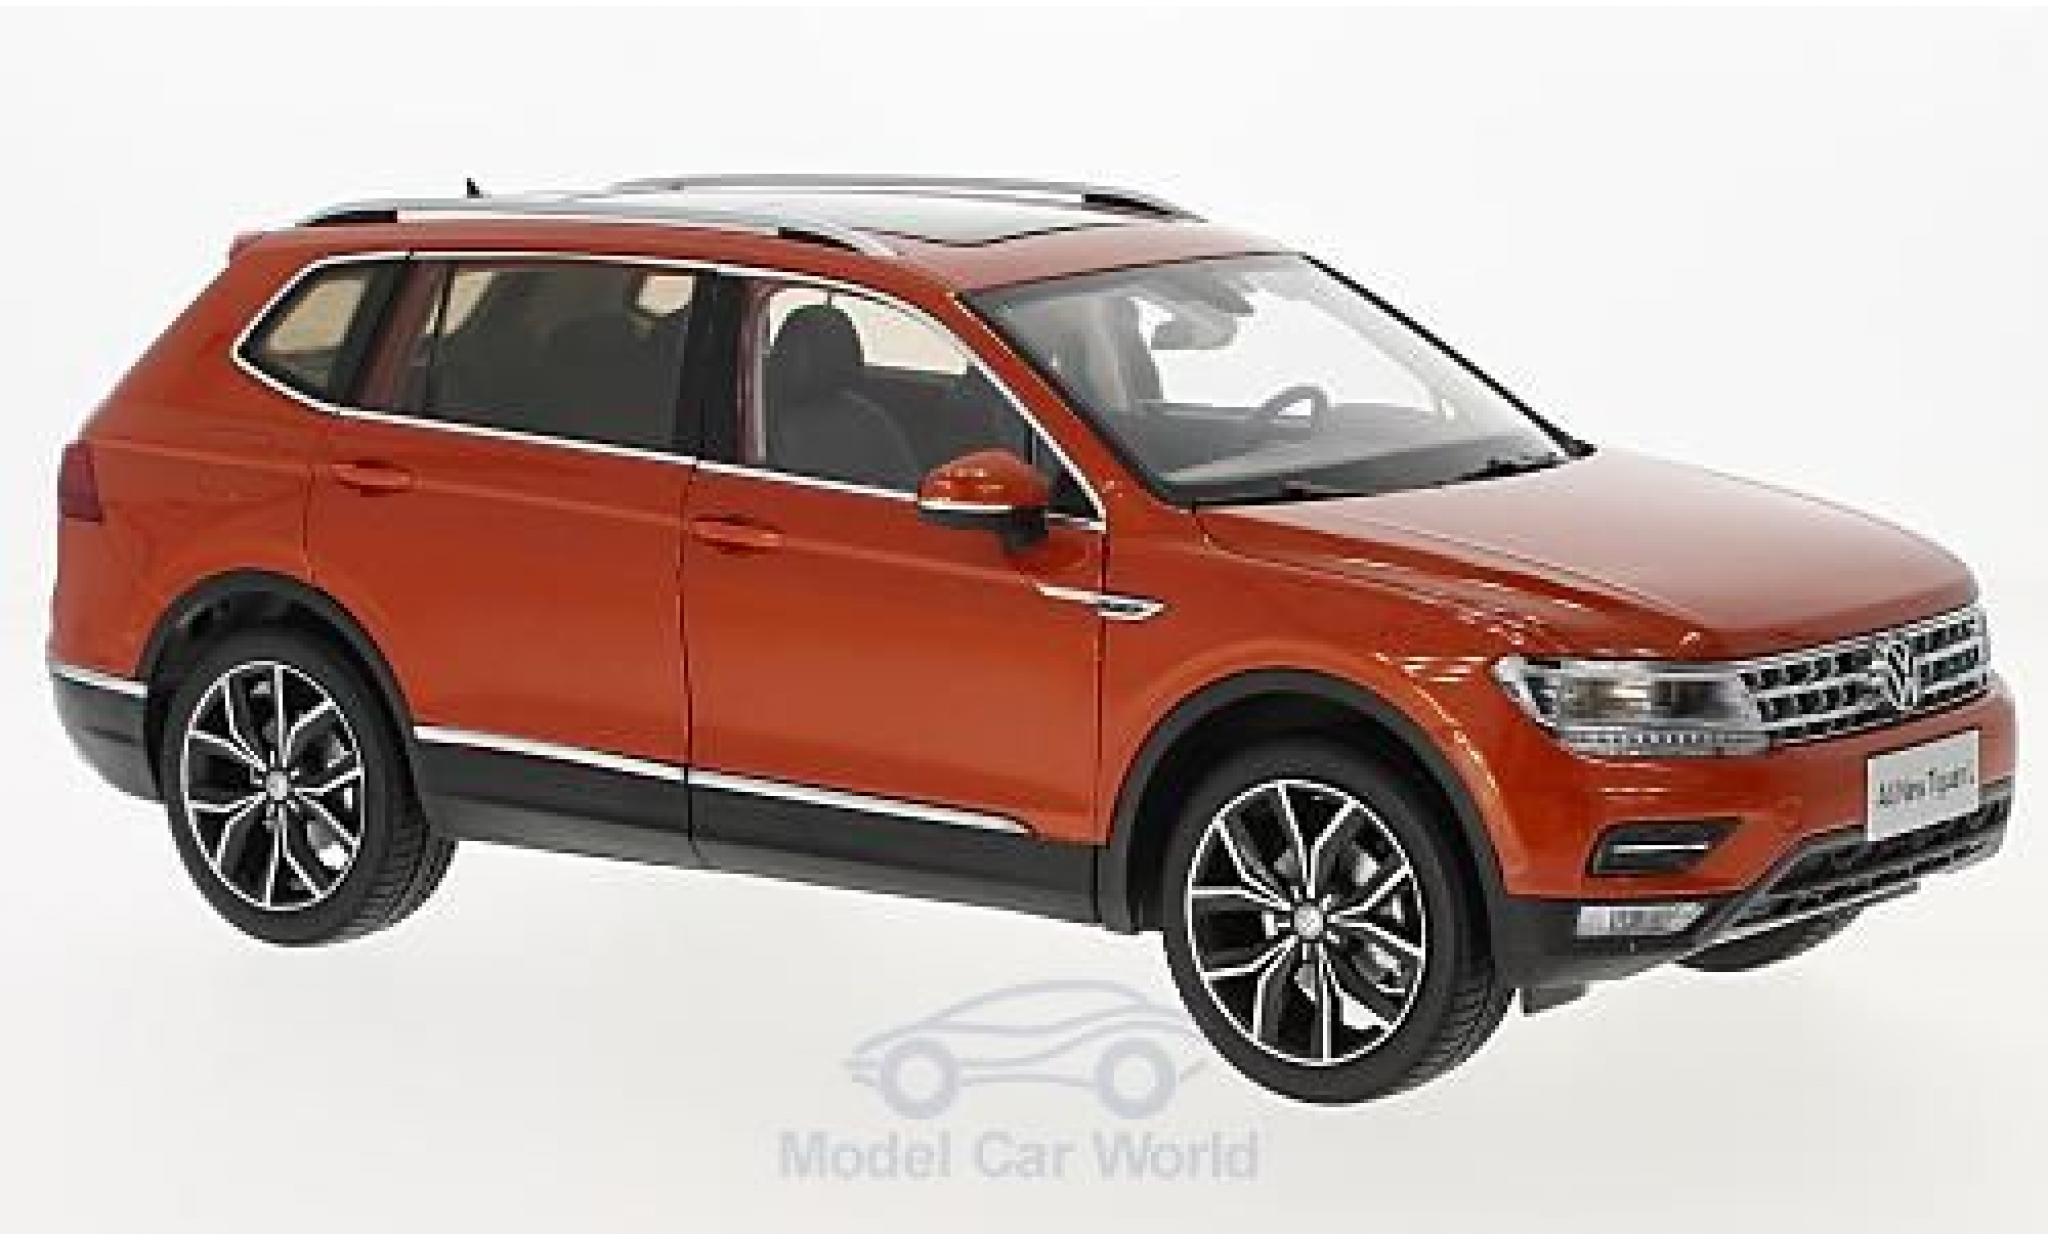 Diecast 1/18 Scale TIGUAN 2013 SUV Off-road Vehicle Alloy Car